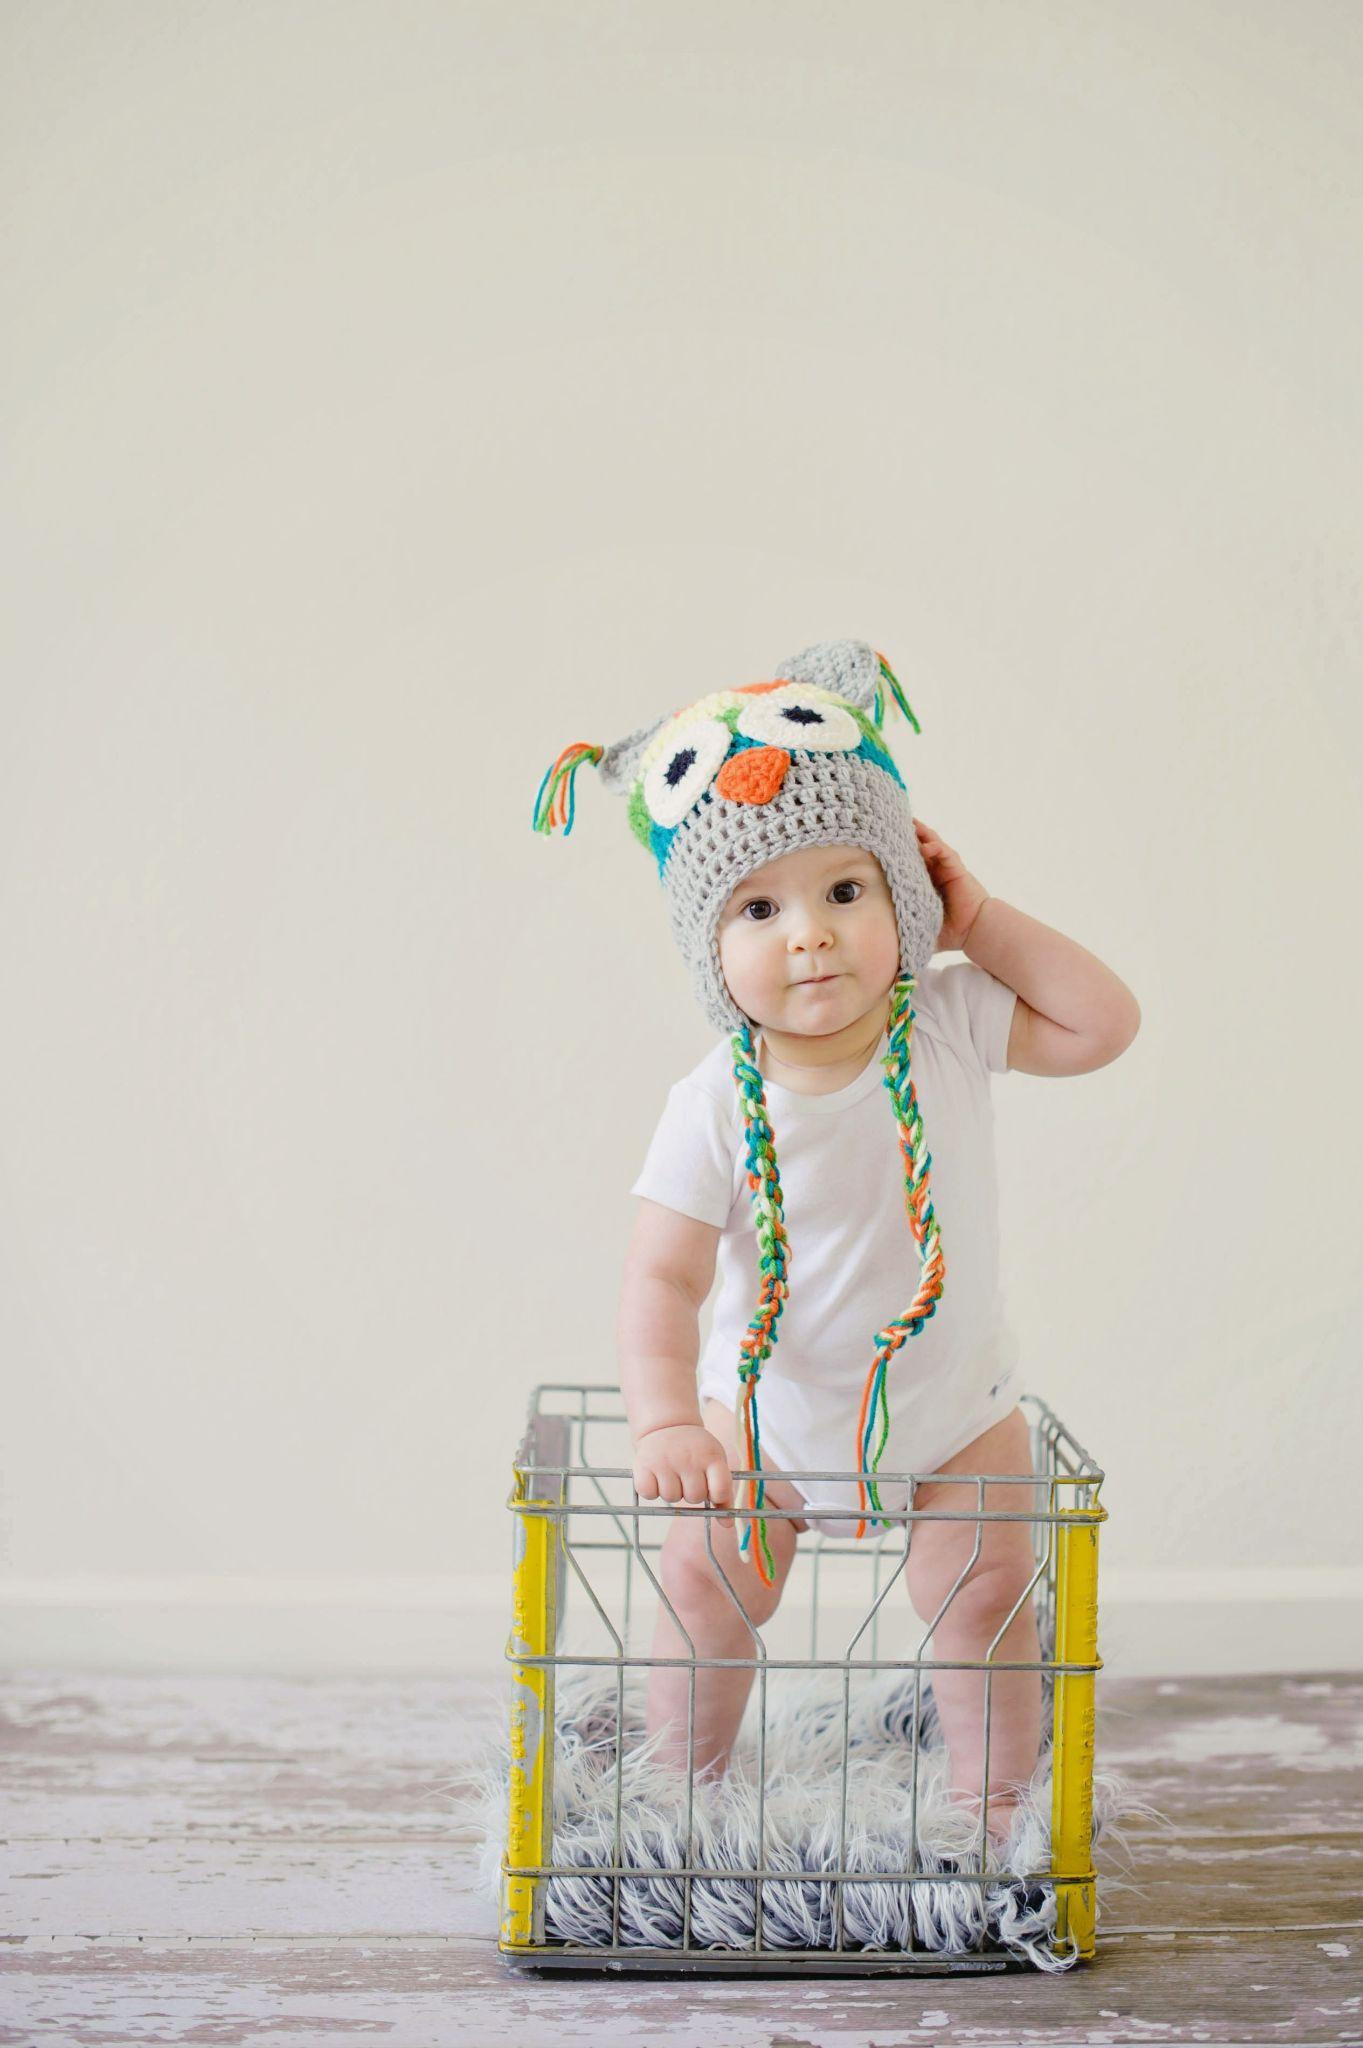 Newborn baby wearing a headband as a accessories for a photo shoot - Newborn Photoshoot - Baby Journey